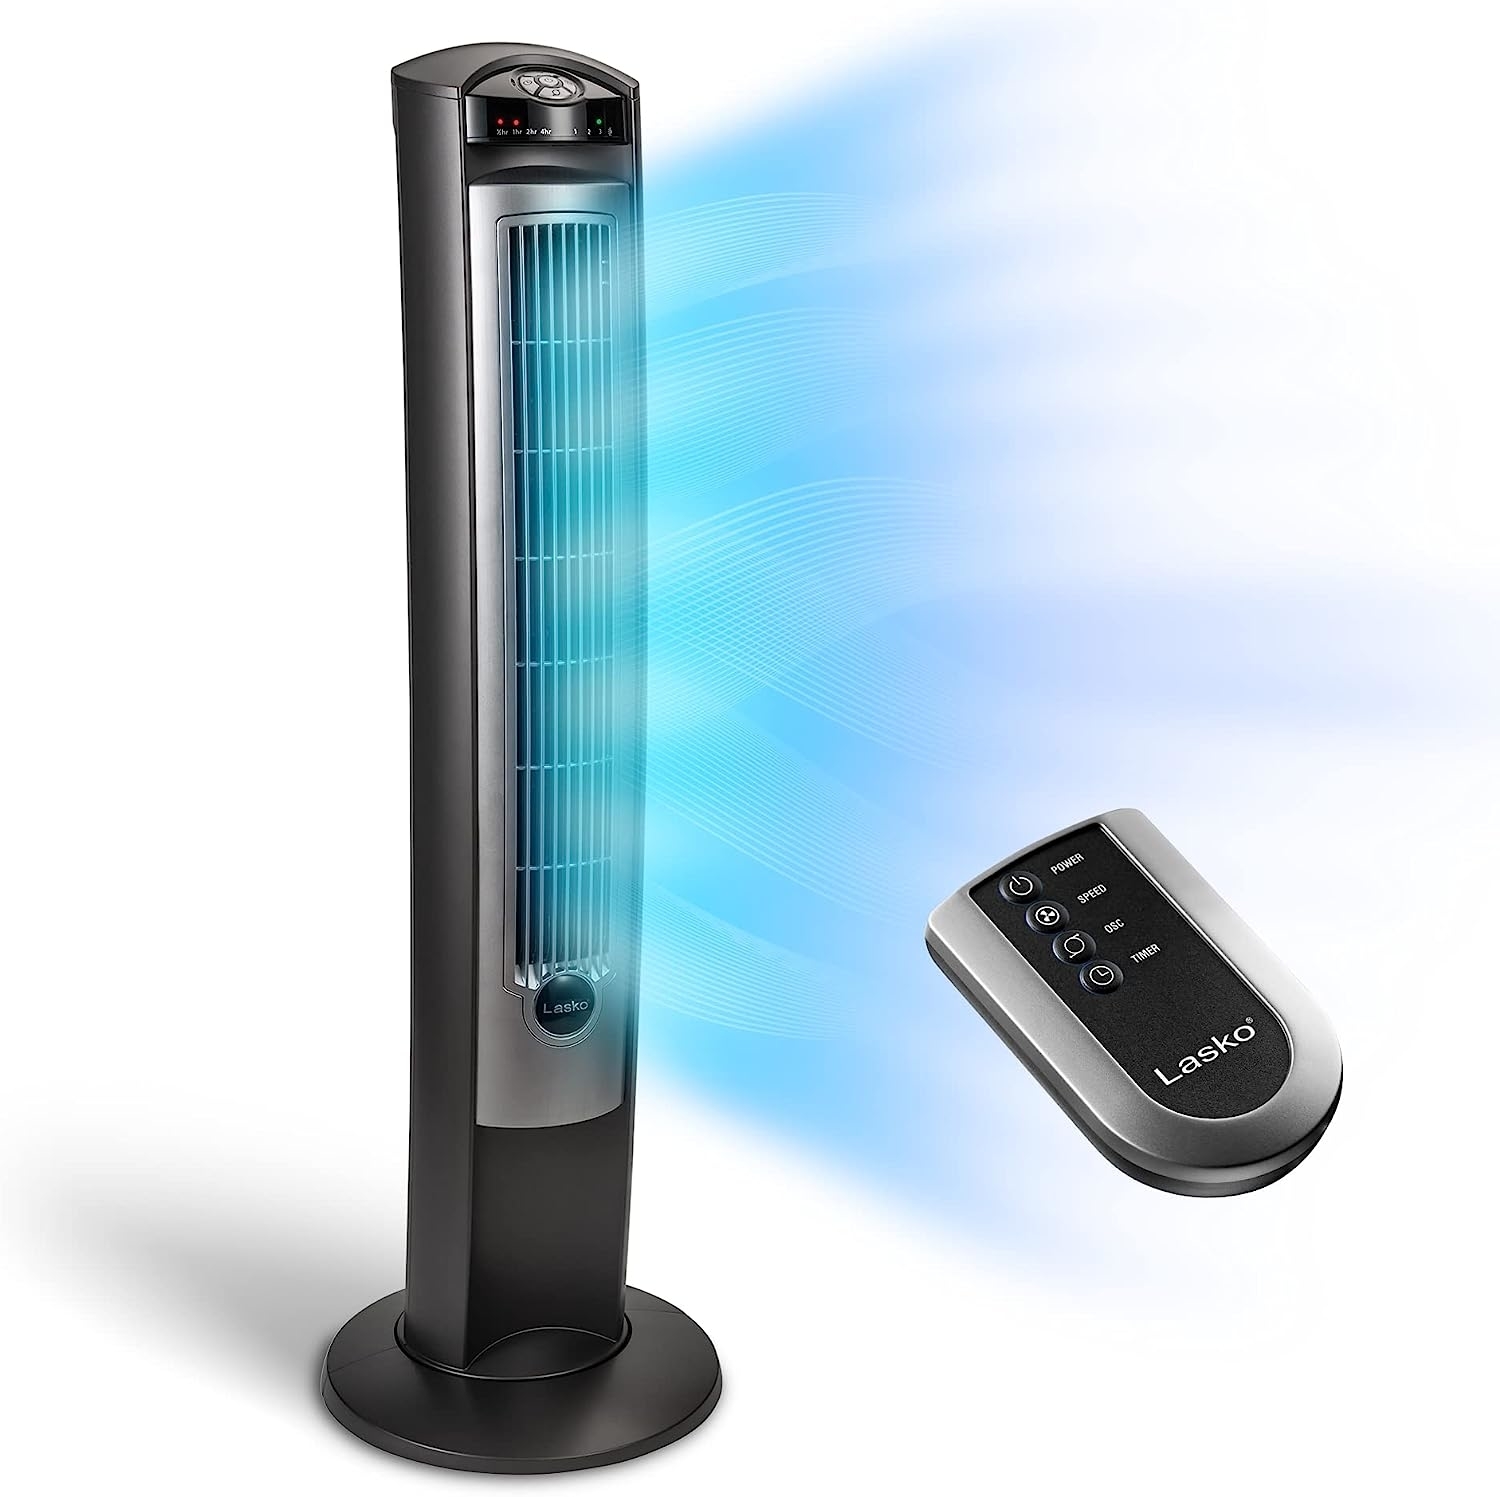 Tower-style fan with remote control, featuring a sleek design and airflow projection